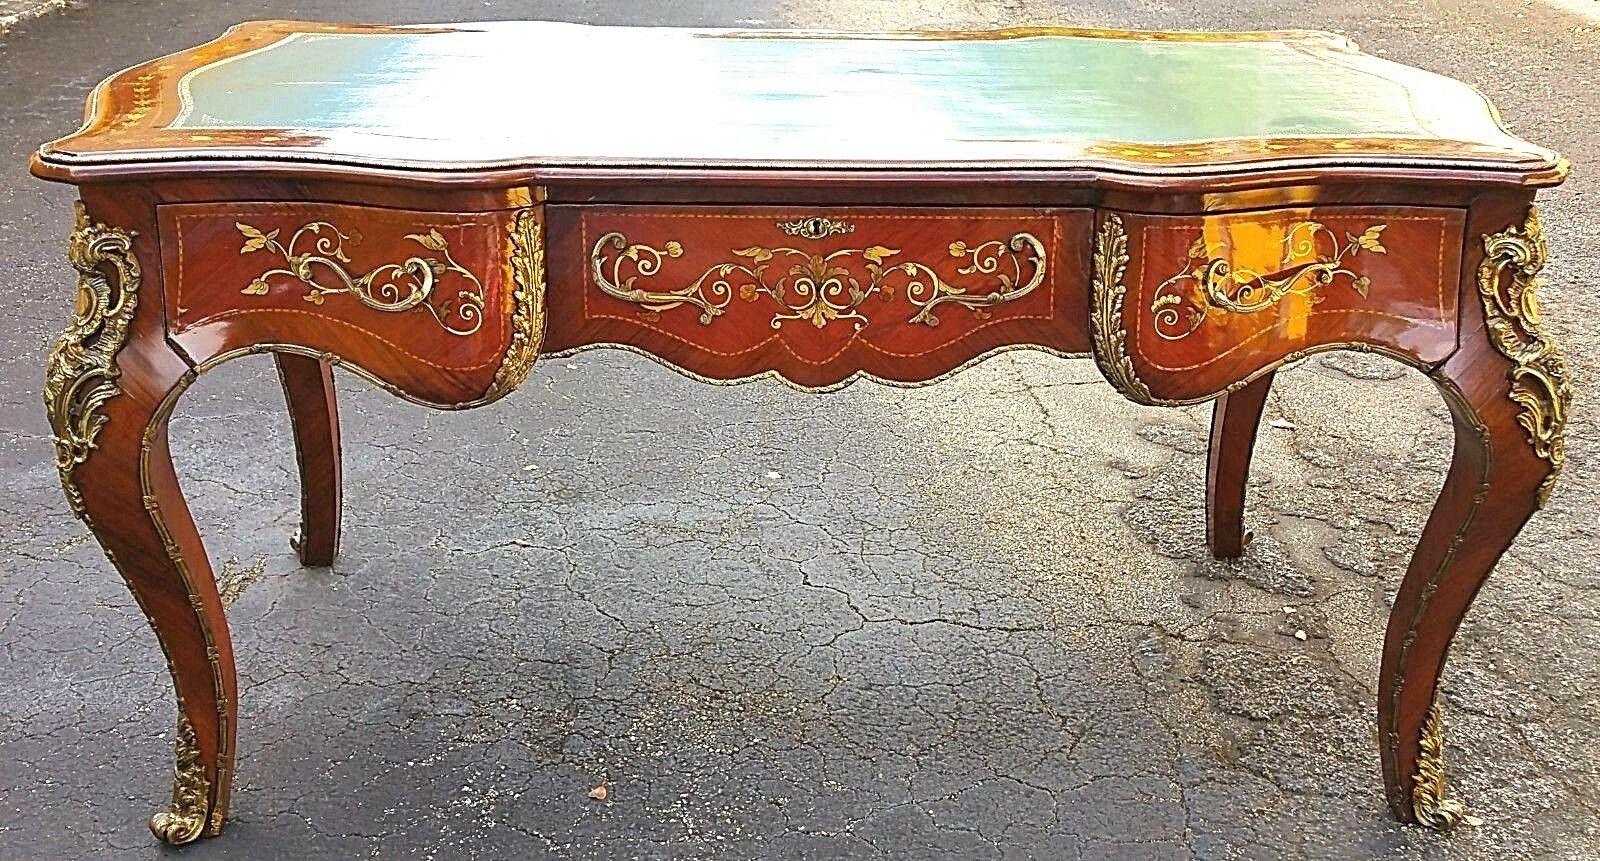 For FULL item description be sure to click on CONTINUE READING at the bottom of this listing.

Offering One Of Our Recent Palm Beach Estate Fine Furniture Acquisitions Of A Marquetry Platt Desk French Louis XV Style Gilt-Bronze-Mounted Shaped